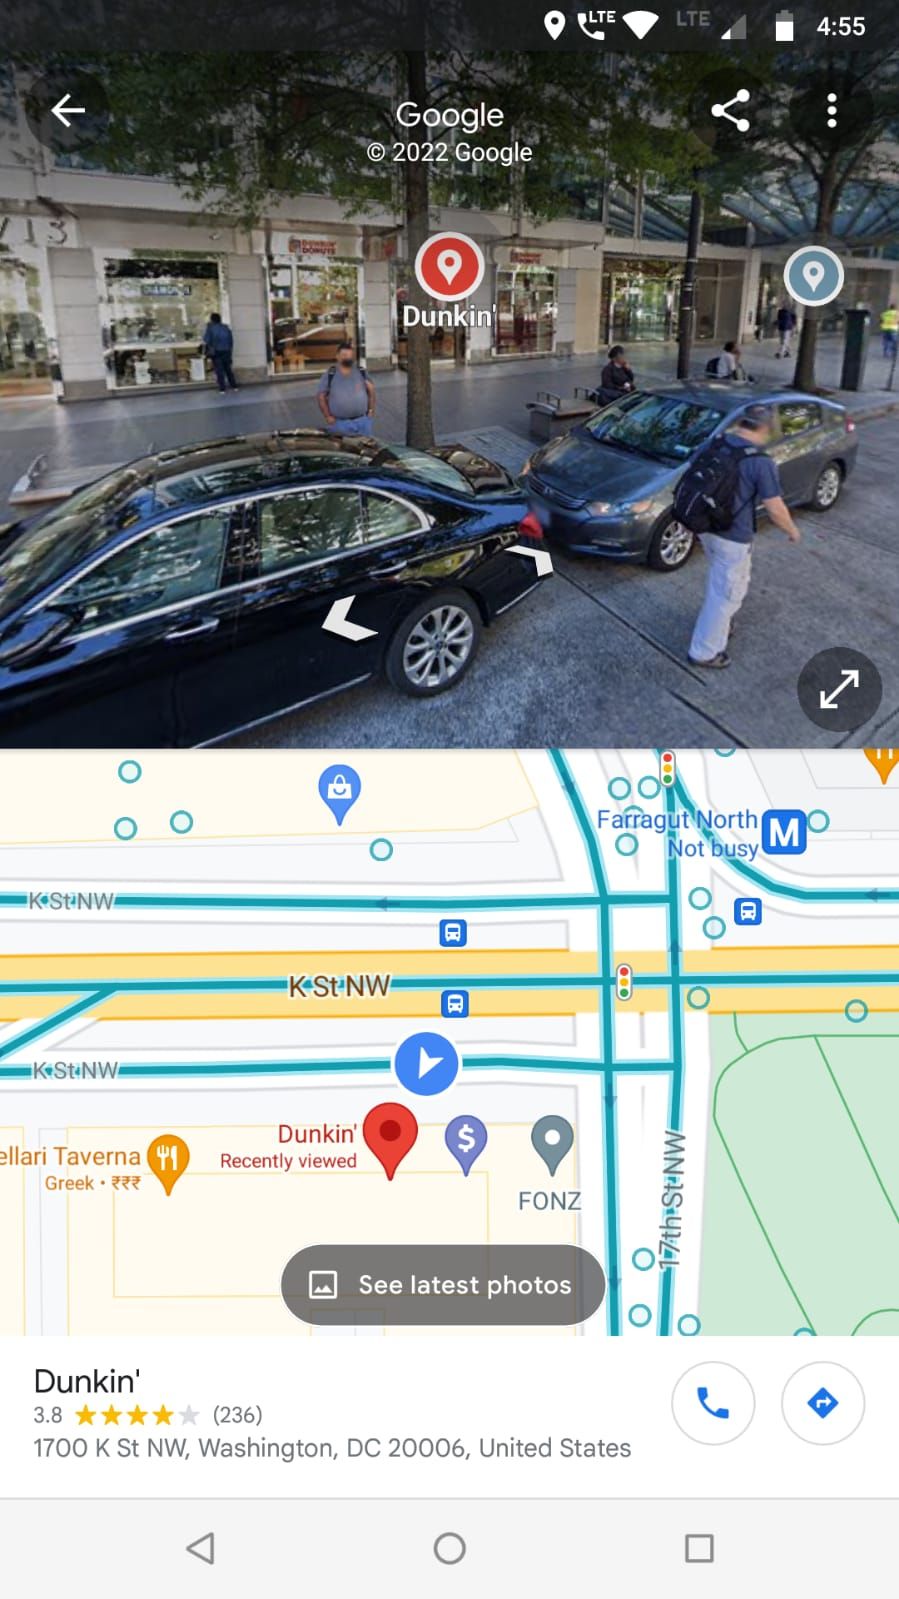 Accessing the Street View on Google Maps Android